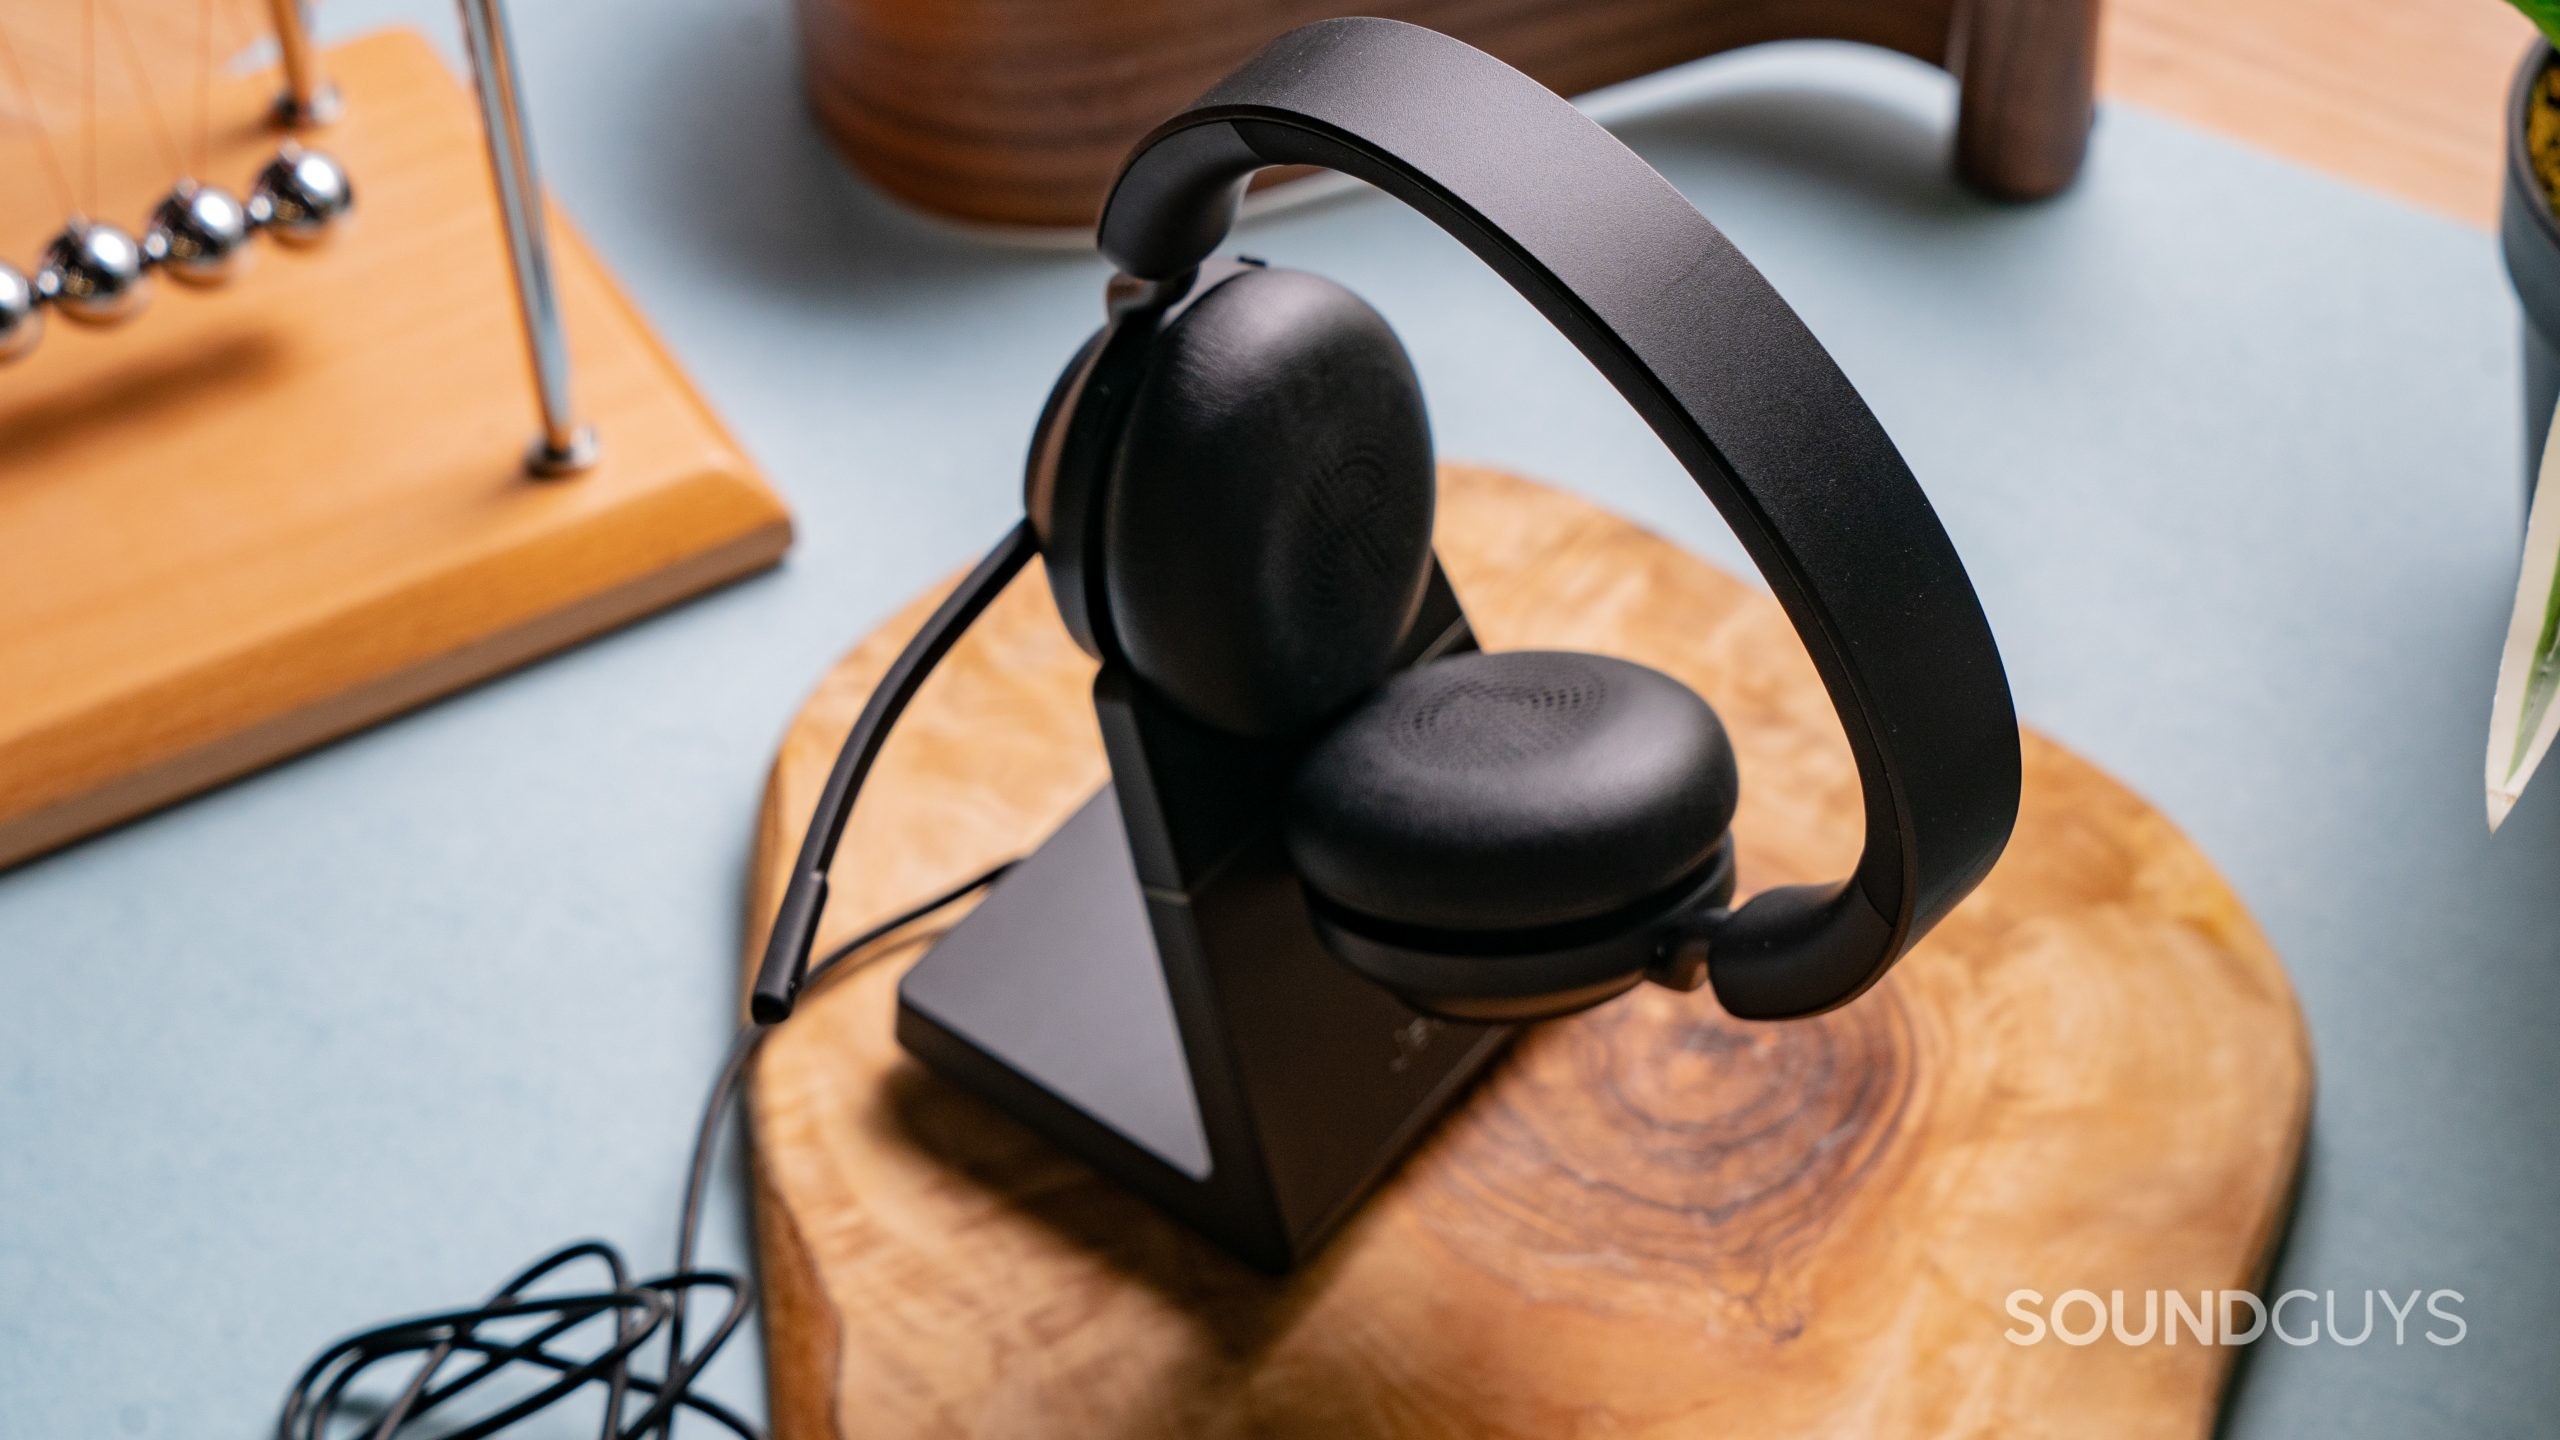 The Jabra Evolve2 65 sitting in its charging cable on top of a wooden surface.